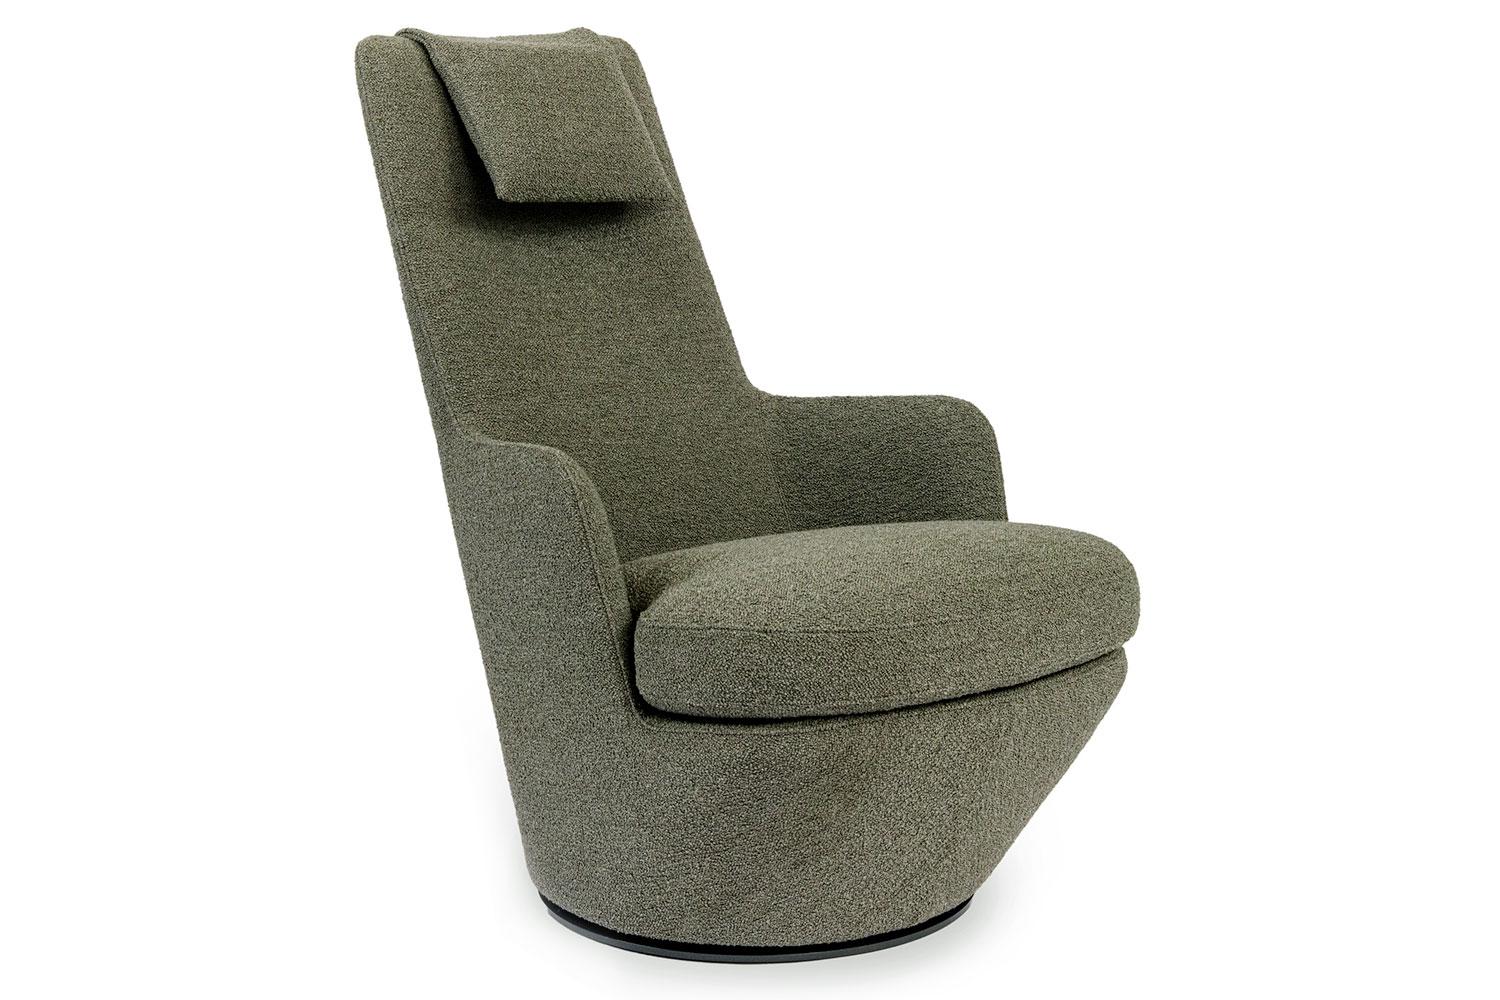 High turn high back self return swivel base lounge chair By Bensen.

Hi Turn is a high back lounge chair that swivels. Comfortable and tailored, it is a lovely addition to any space. Frame is structural metal with a flexible polyurethane body.